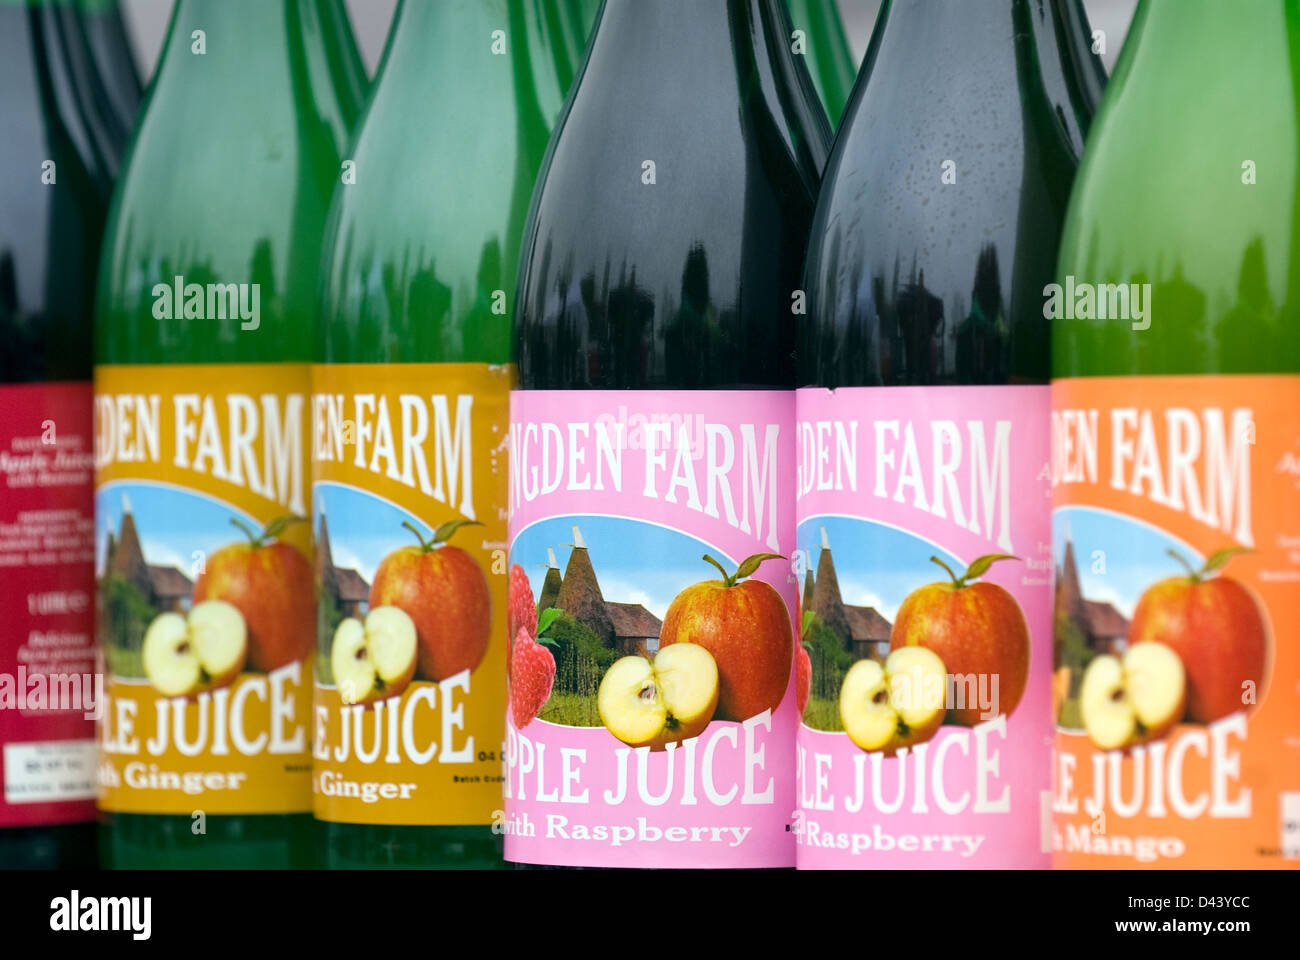 https://c8.alamy.com/comp/D43YCC/selection-of-bottles-of-juices-on-display-at-farnham-farmers-market-D43YCC.jpg